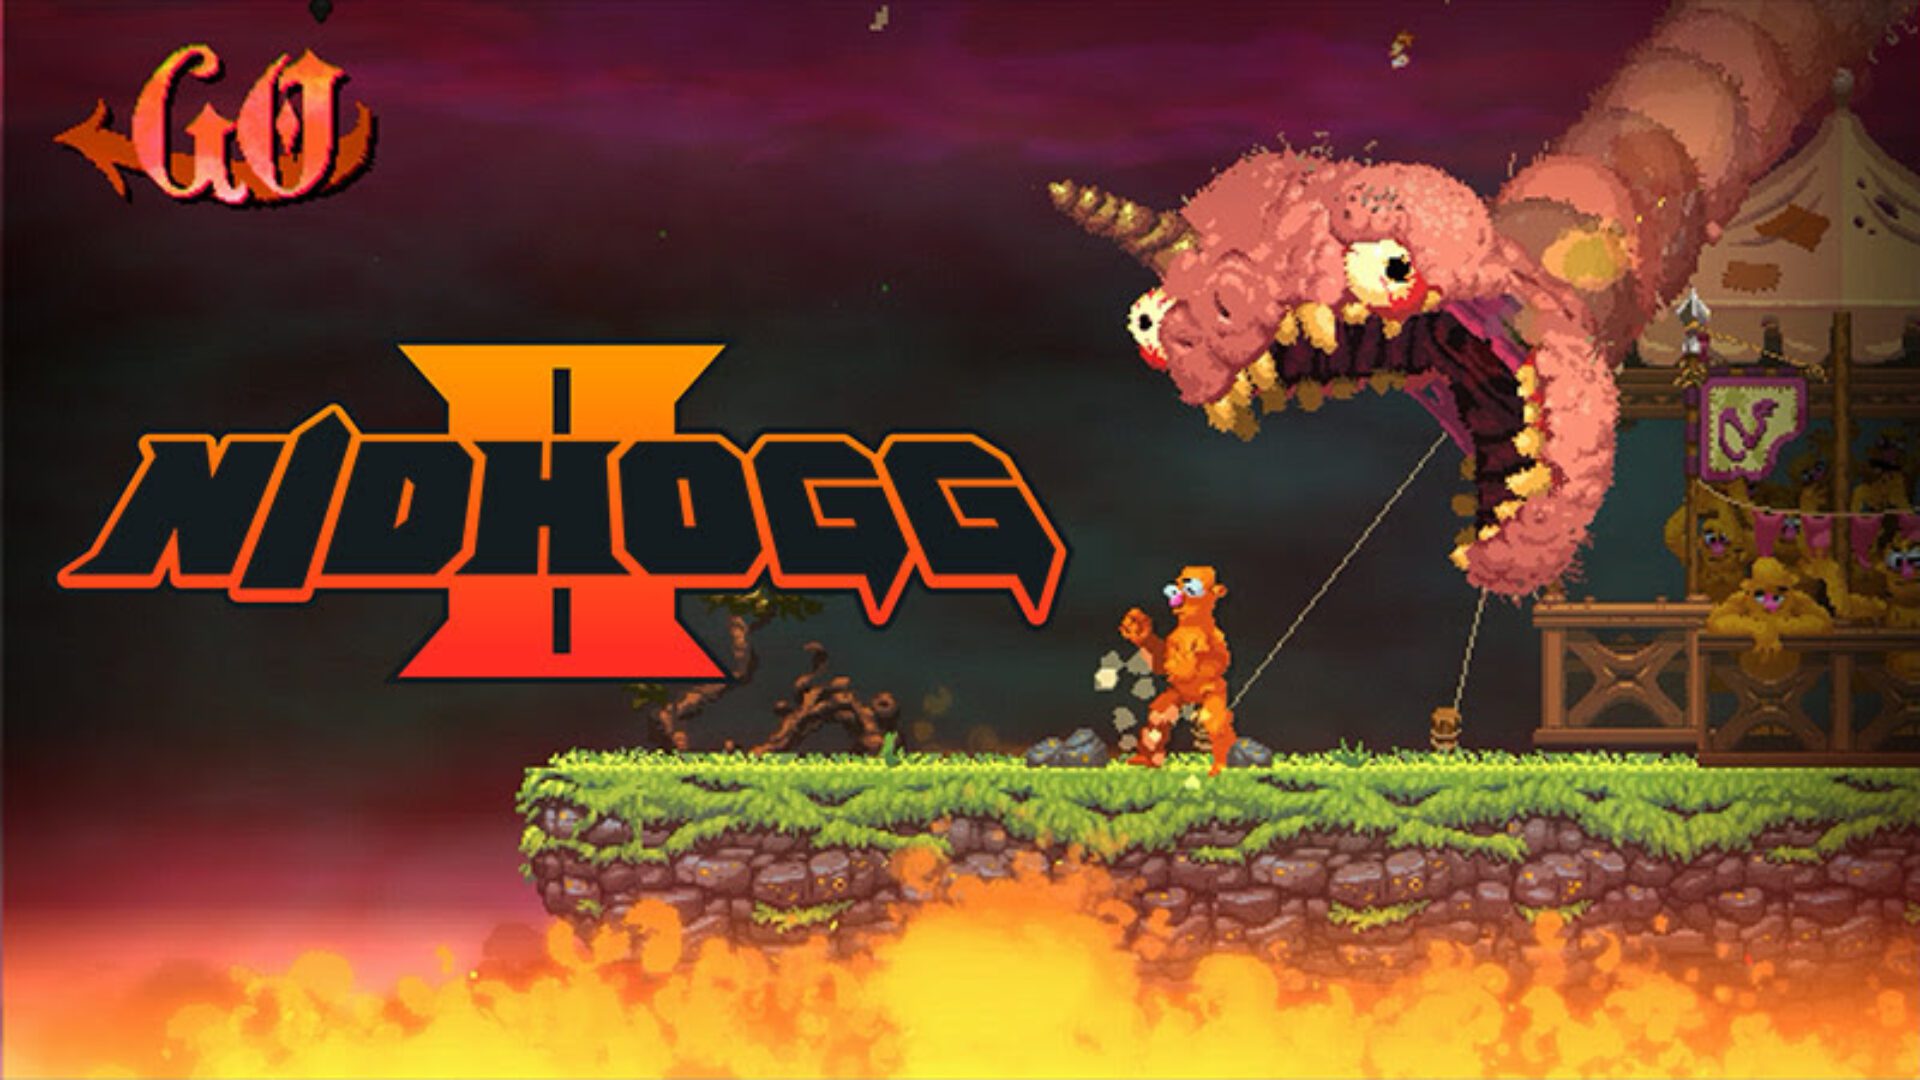 Sequel to Messhof’s award-winning game Nidhogg, to be shown for the first time at TwitchCon